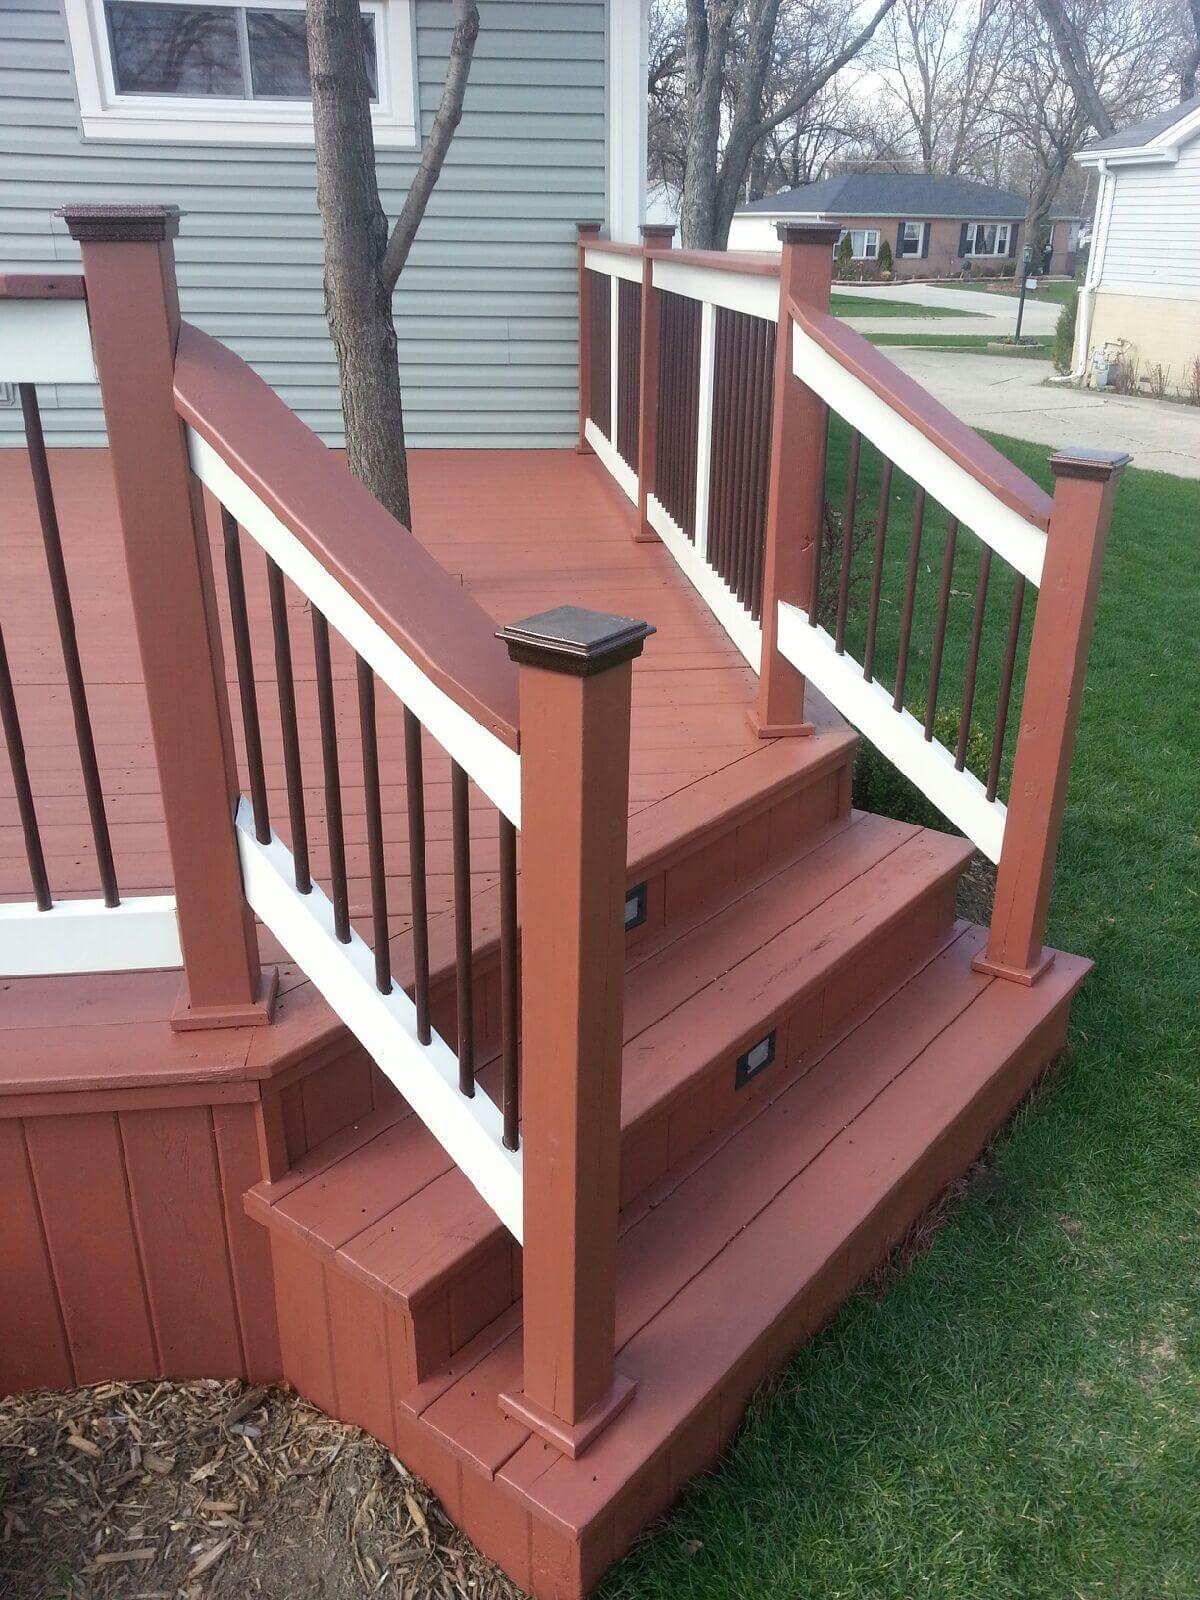 Repairs and maintenance for your deck, fence, and exterior wood staining. - Deck Staining Buffalo Grove - Deck Cleaning Services